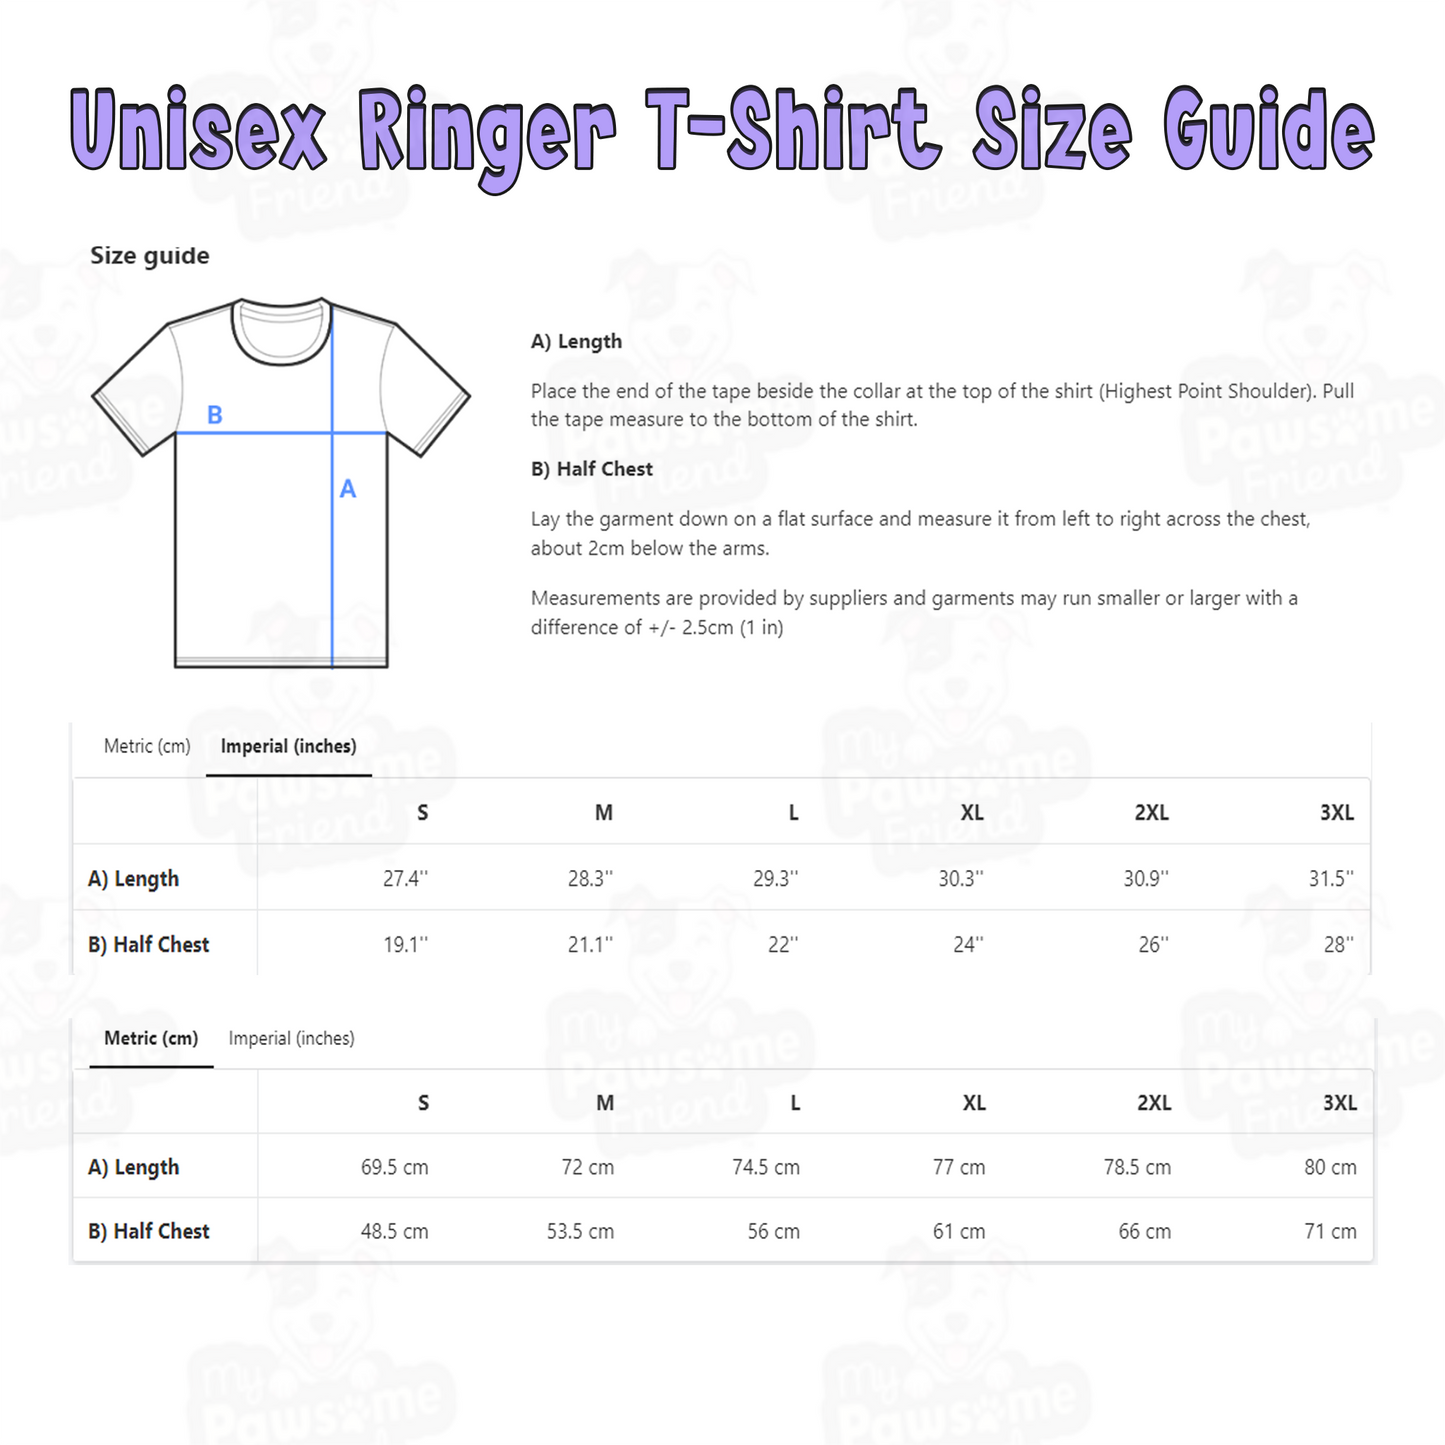 Dogs Have One Aim in Life... To Bestow Their Hearts Unisex Ringer T-shirt size chart